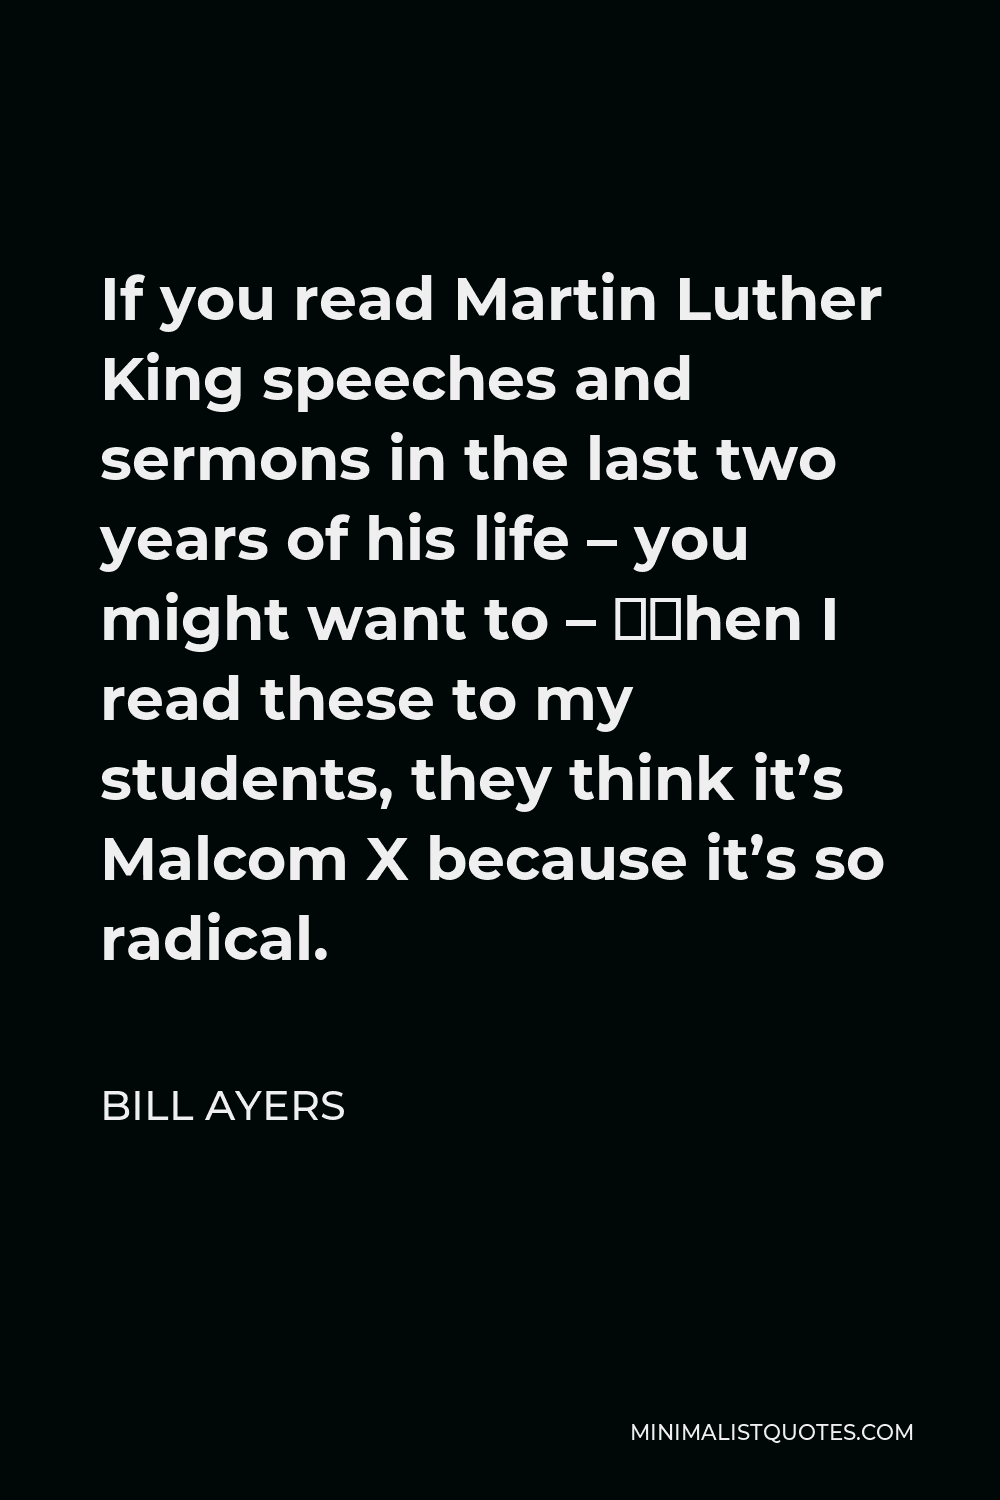 Bill Ayers Quote - If you read Martin Luther King speeches and sermons in the last two years of his life – you might want to – when I read these to my students, they think it’s Malcom X because it’s so radical.